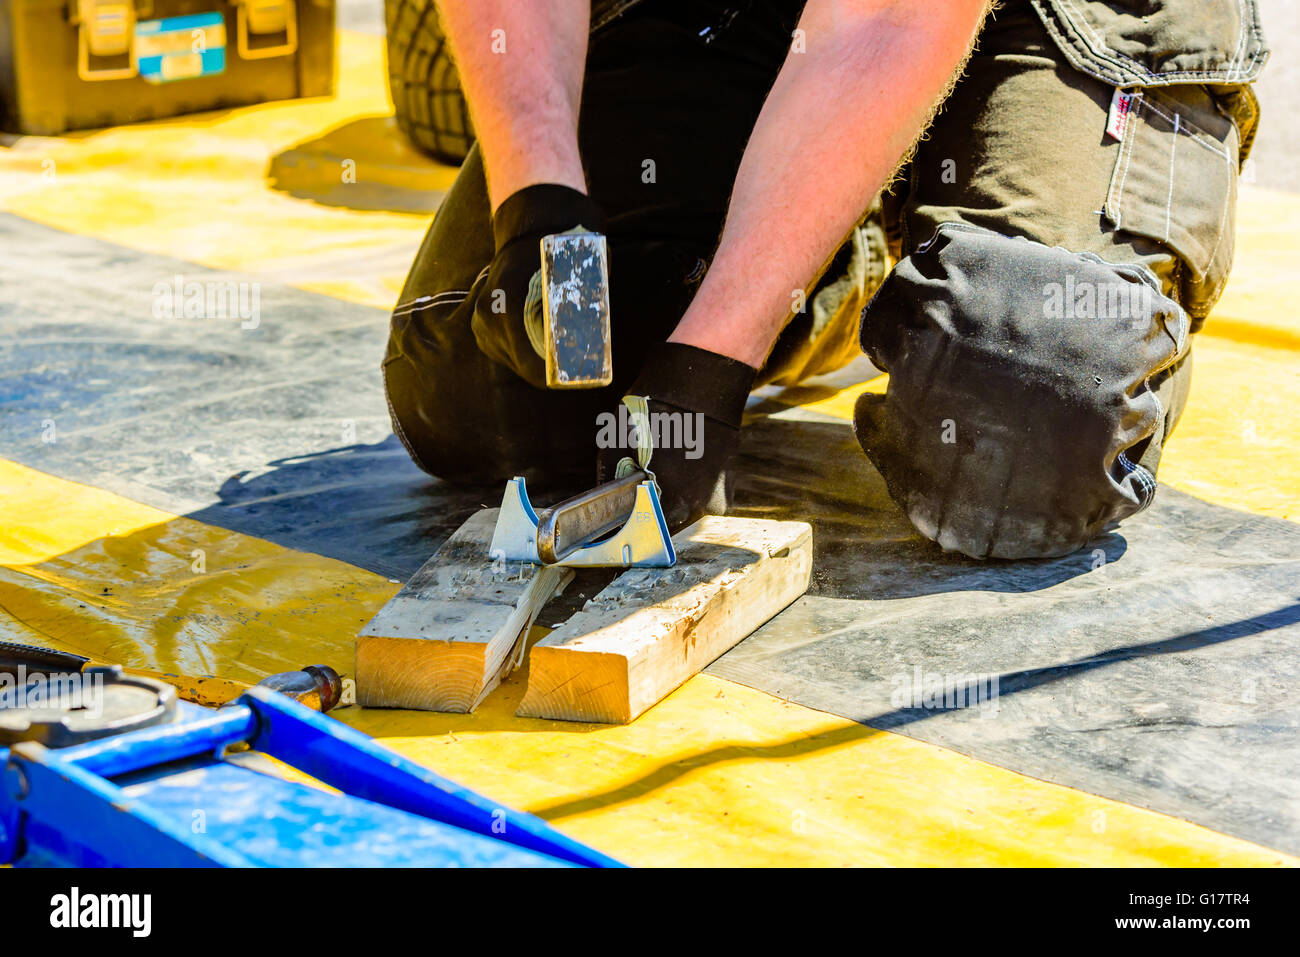 Emmaboda, Sweden - May 7, 2016: 41st South Swedish Rally in service depot. Crew adjusting a clamp with a wrench and a hammer clo Stock Photo